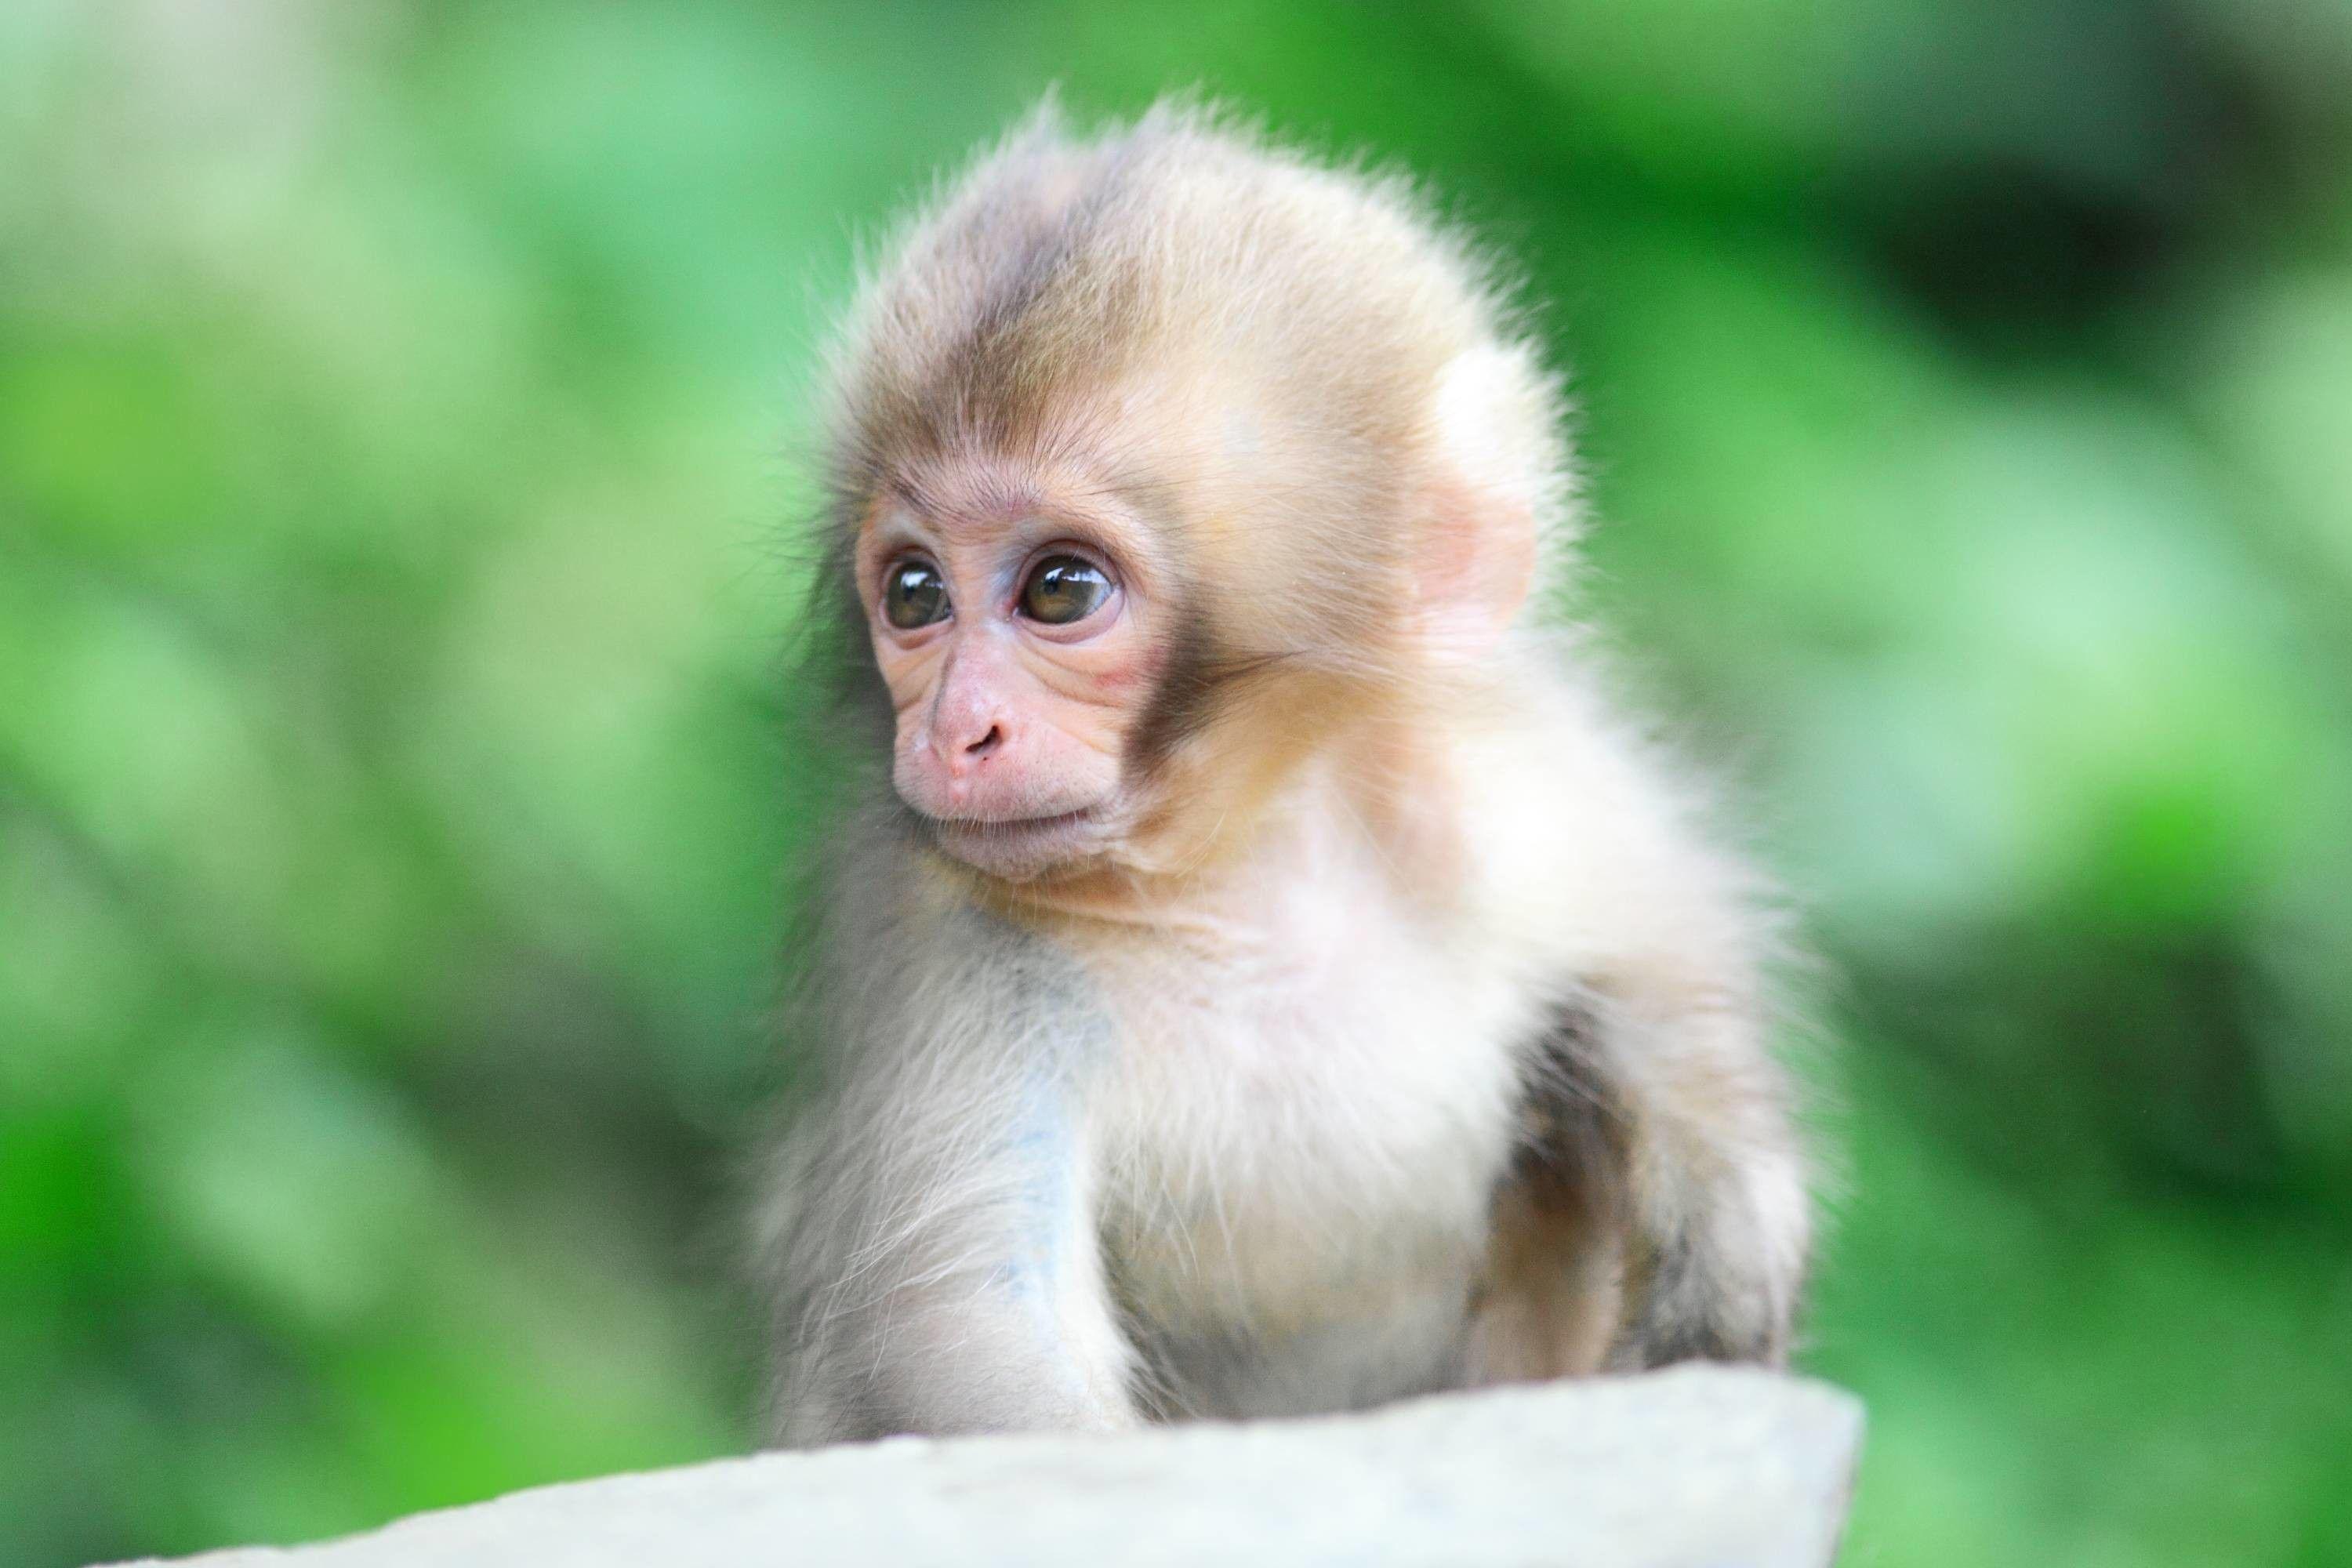 Monkey» 1080P, 2k, 4k HD wallpapers, backgrounds free download | Rare  Gallery » Page 3